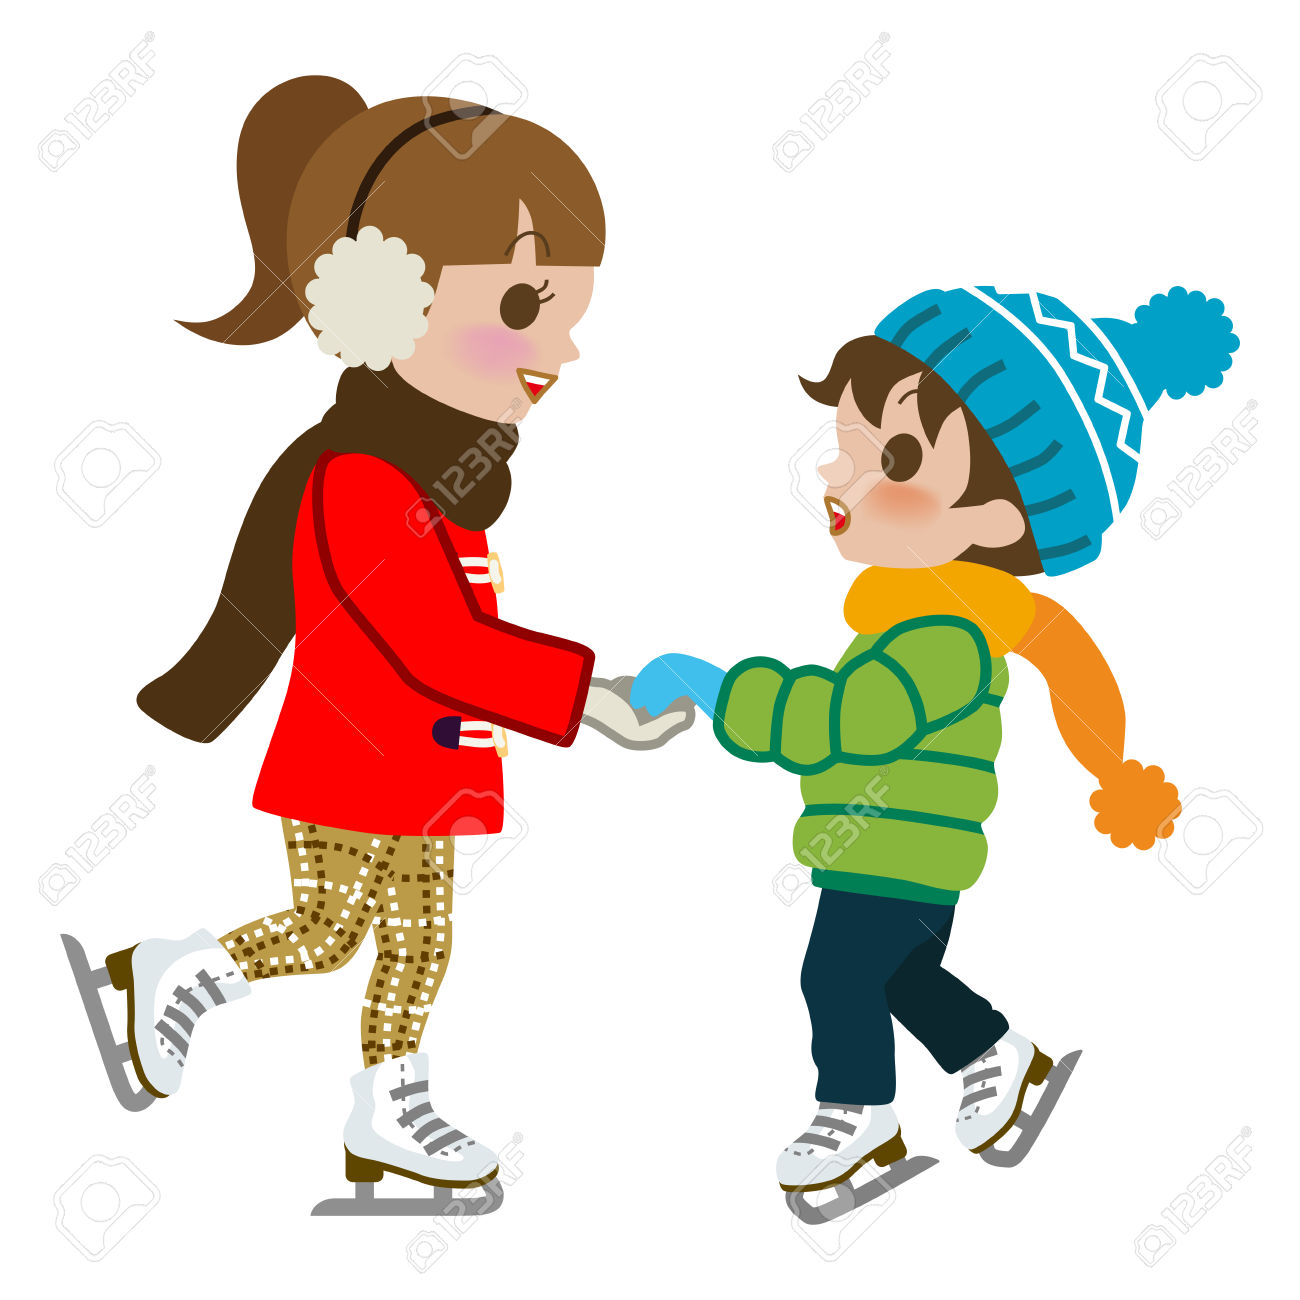 free clipart images ice skating - photo #10